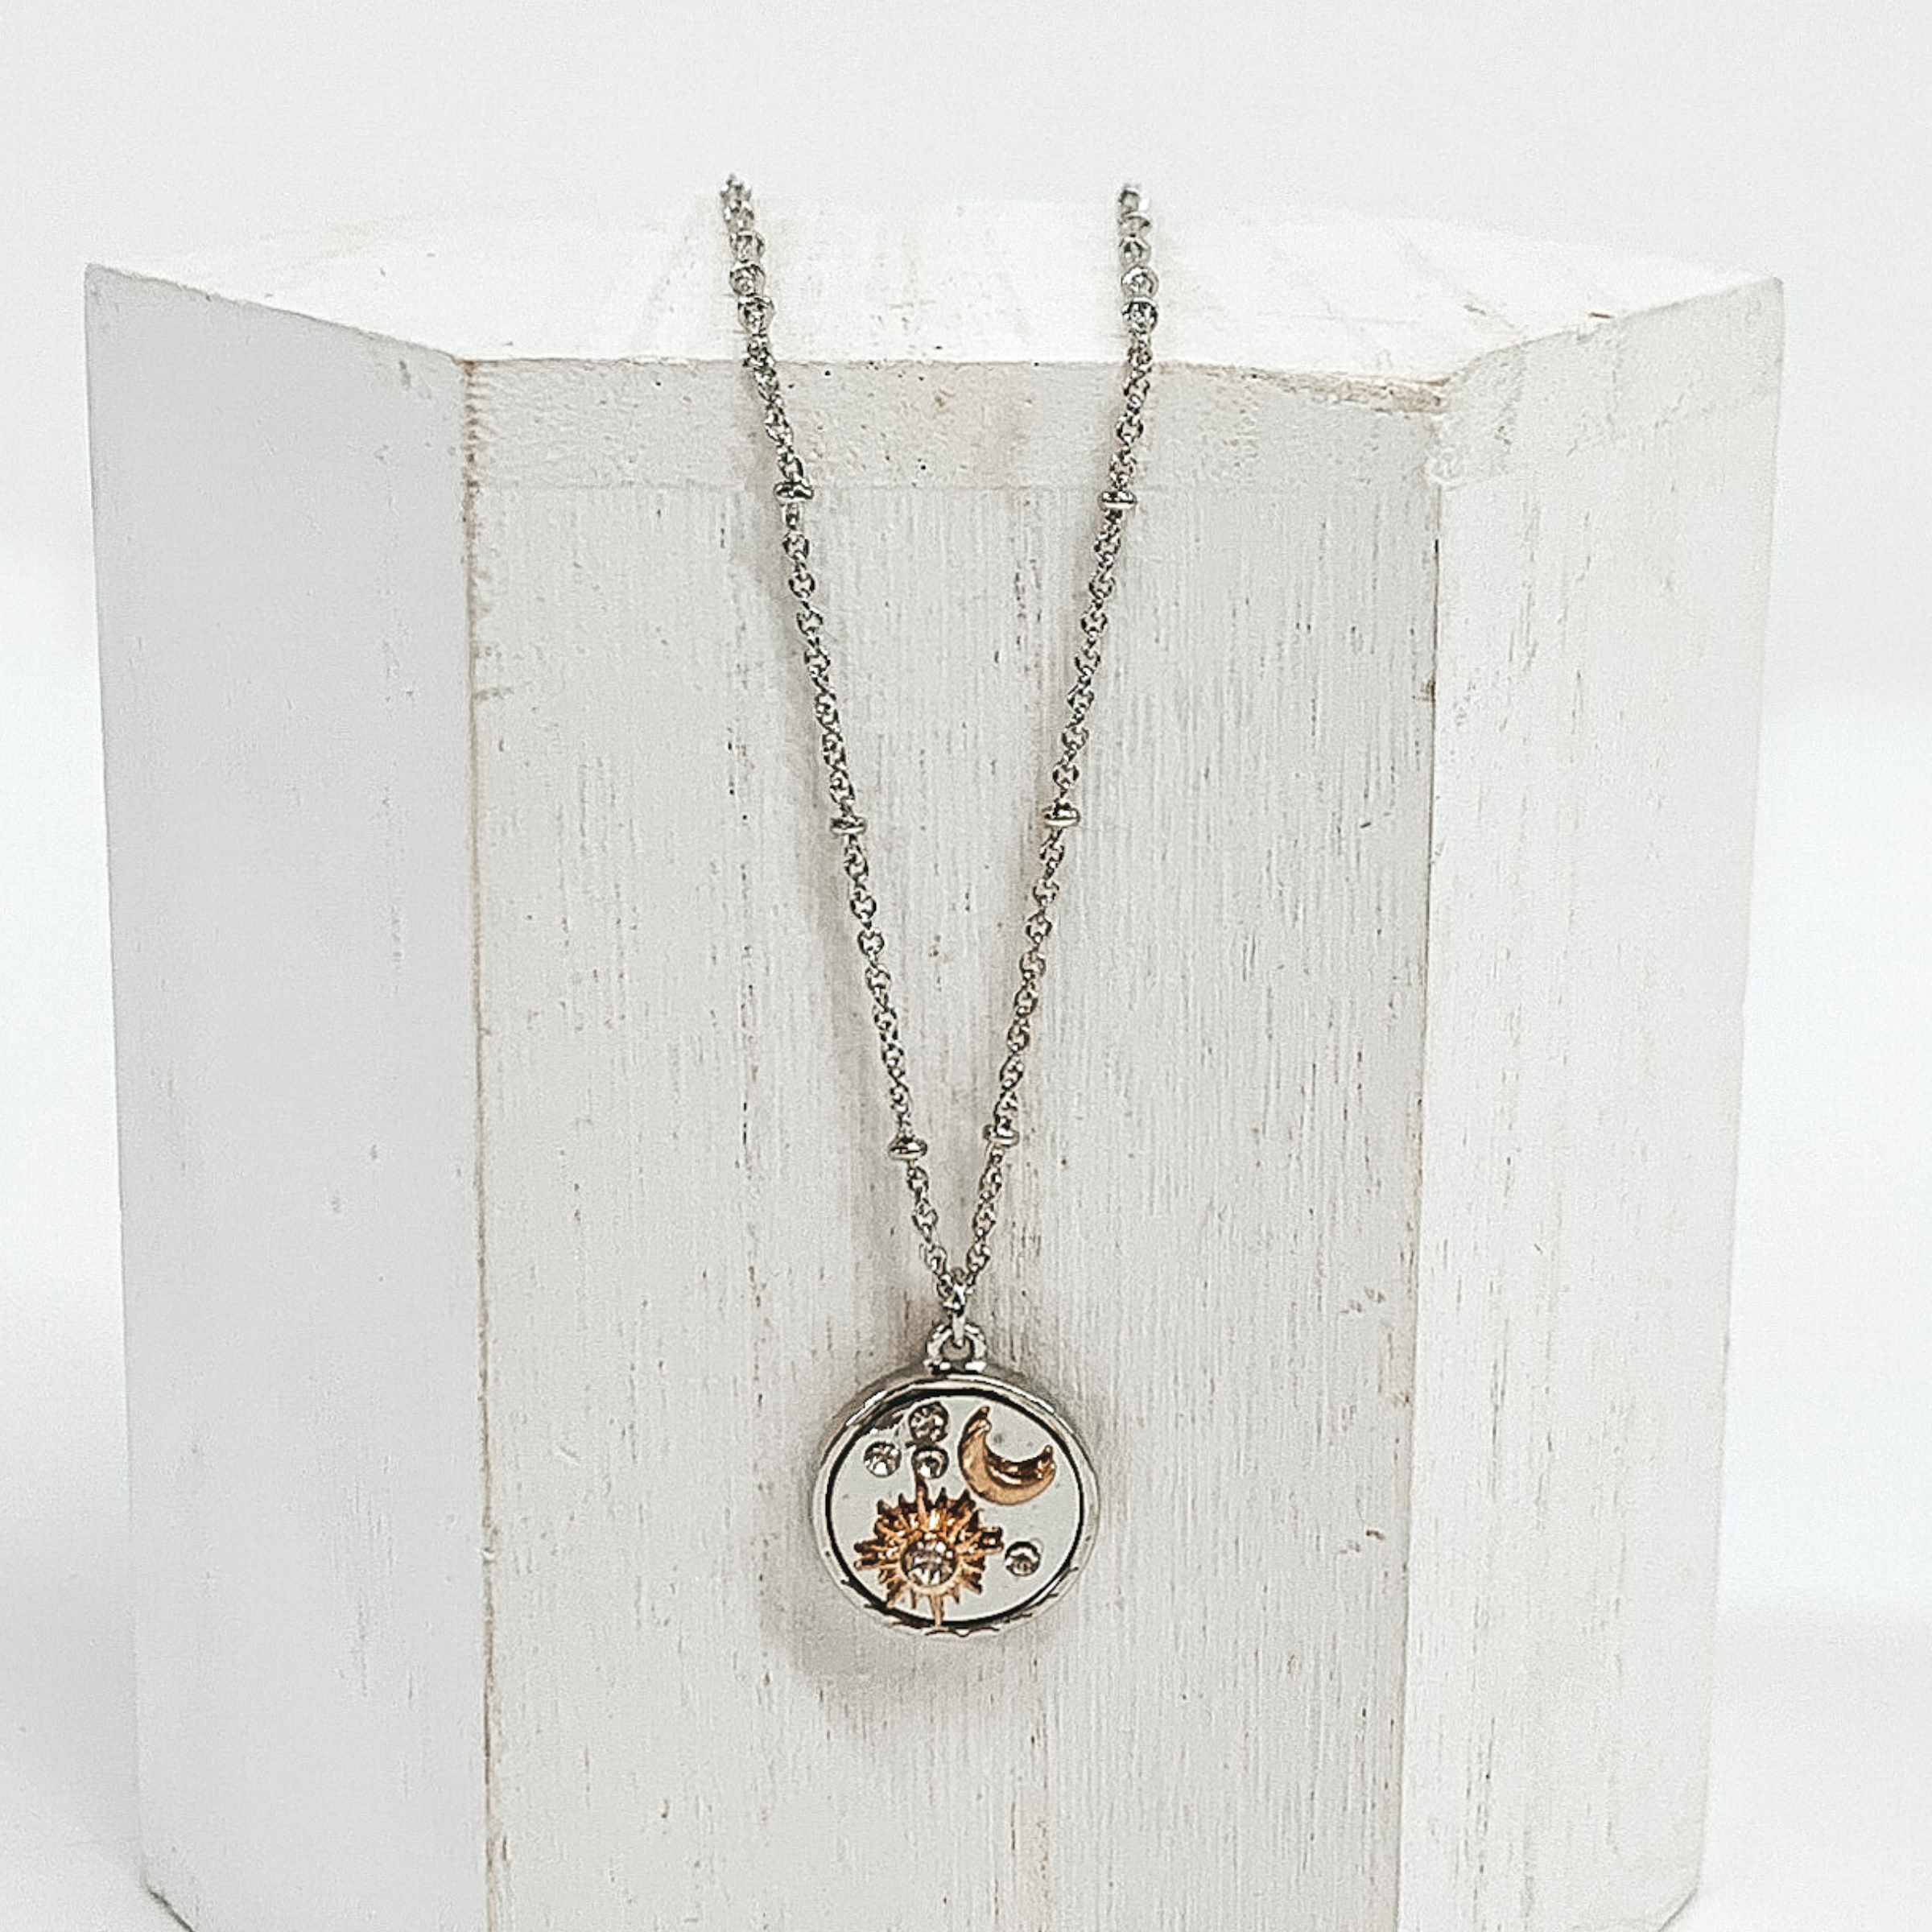 Silver necklace with silver circle pendant. The circle pendant has clear round circles, a gold star, and a gold moon. This necklace is pictured on a white block and on a white background. 